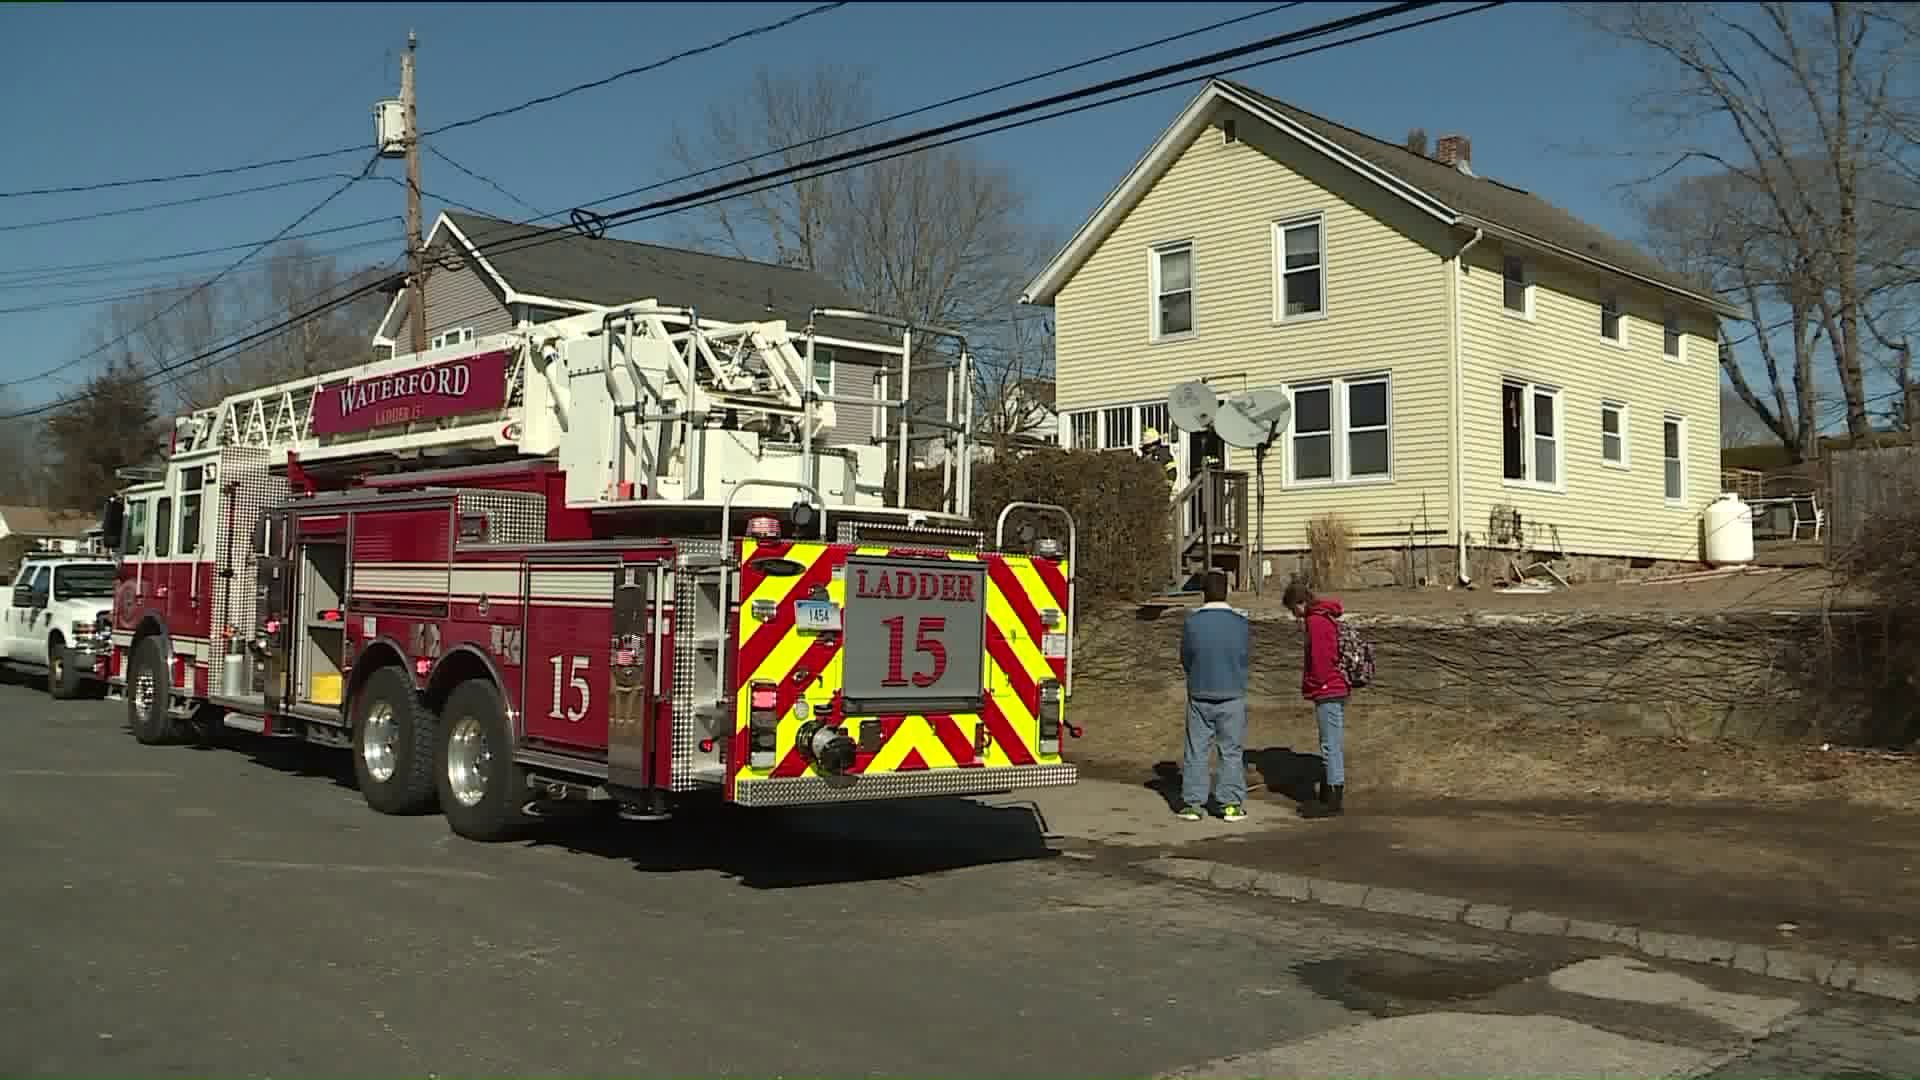 Waterford firefighter injured